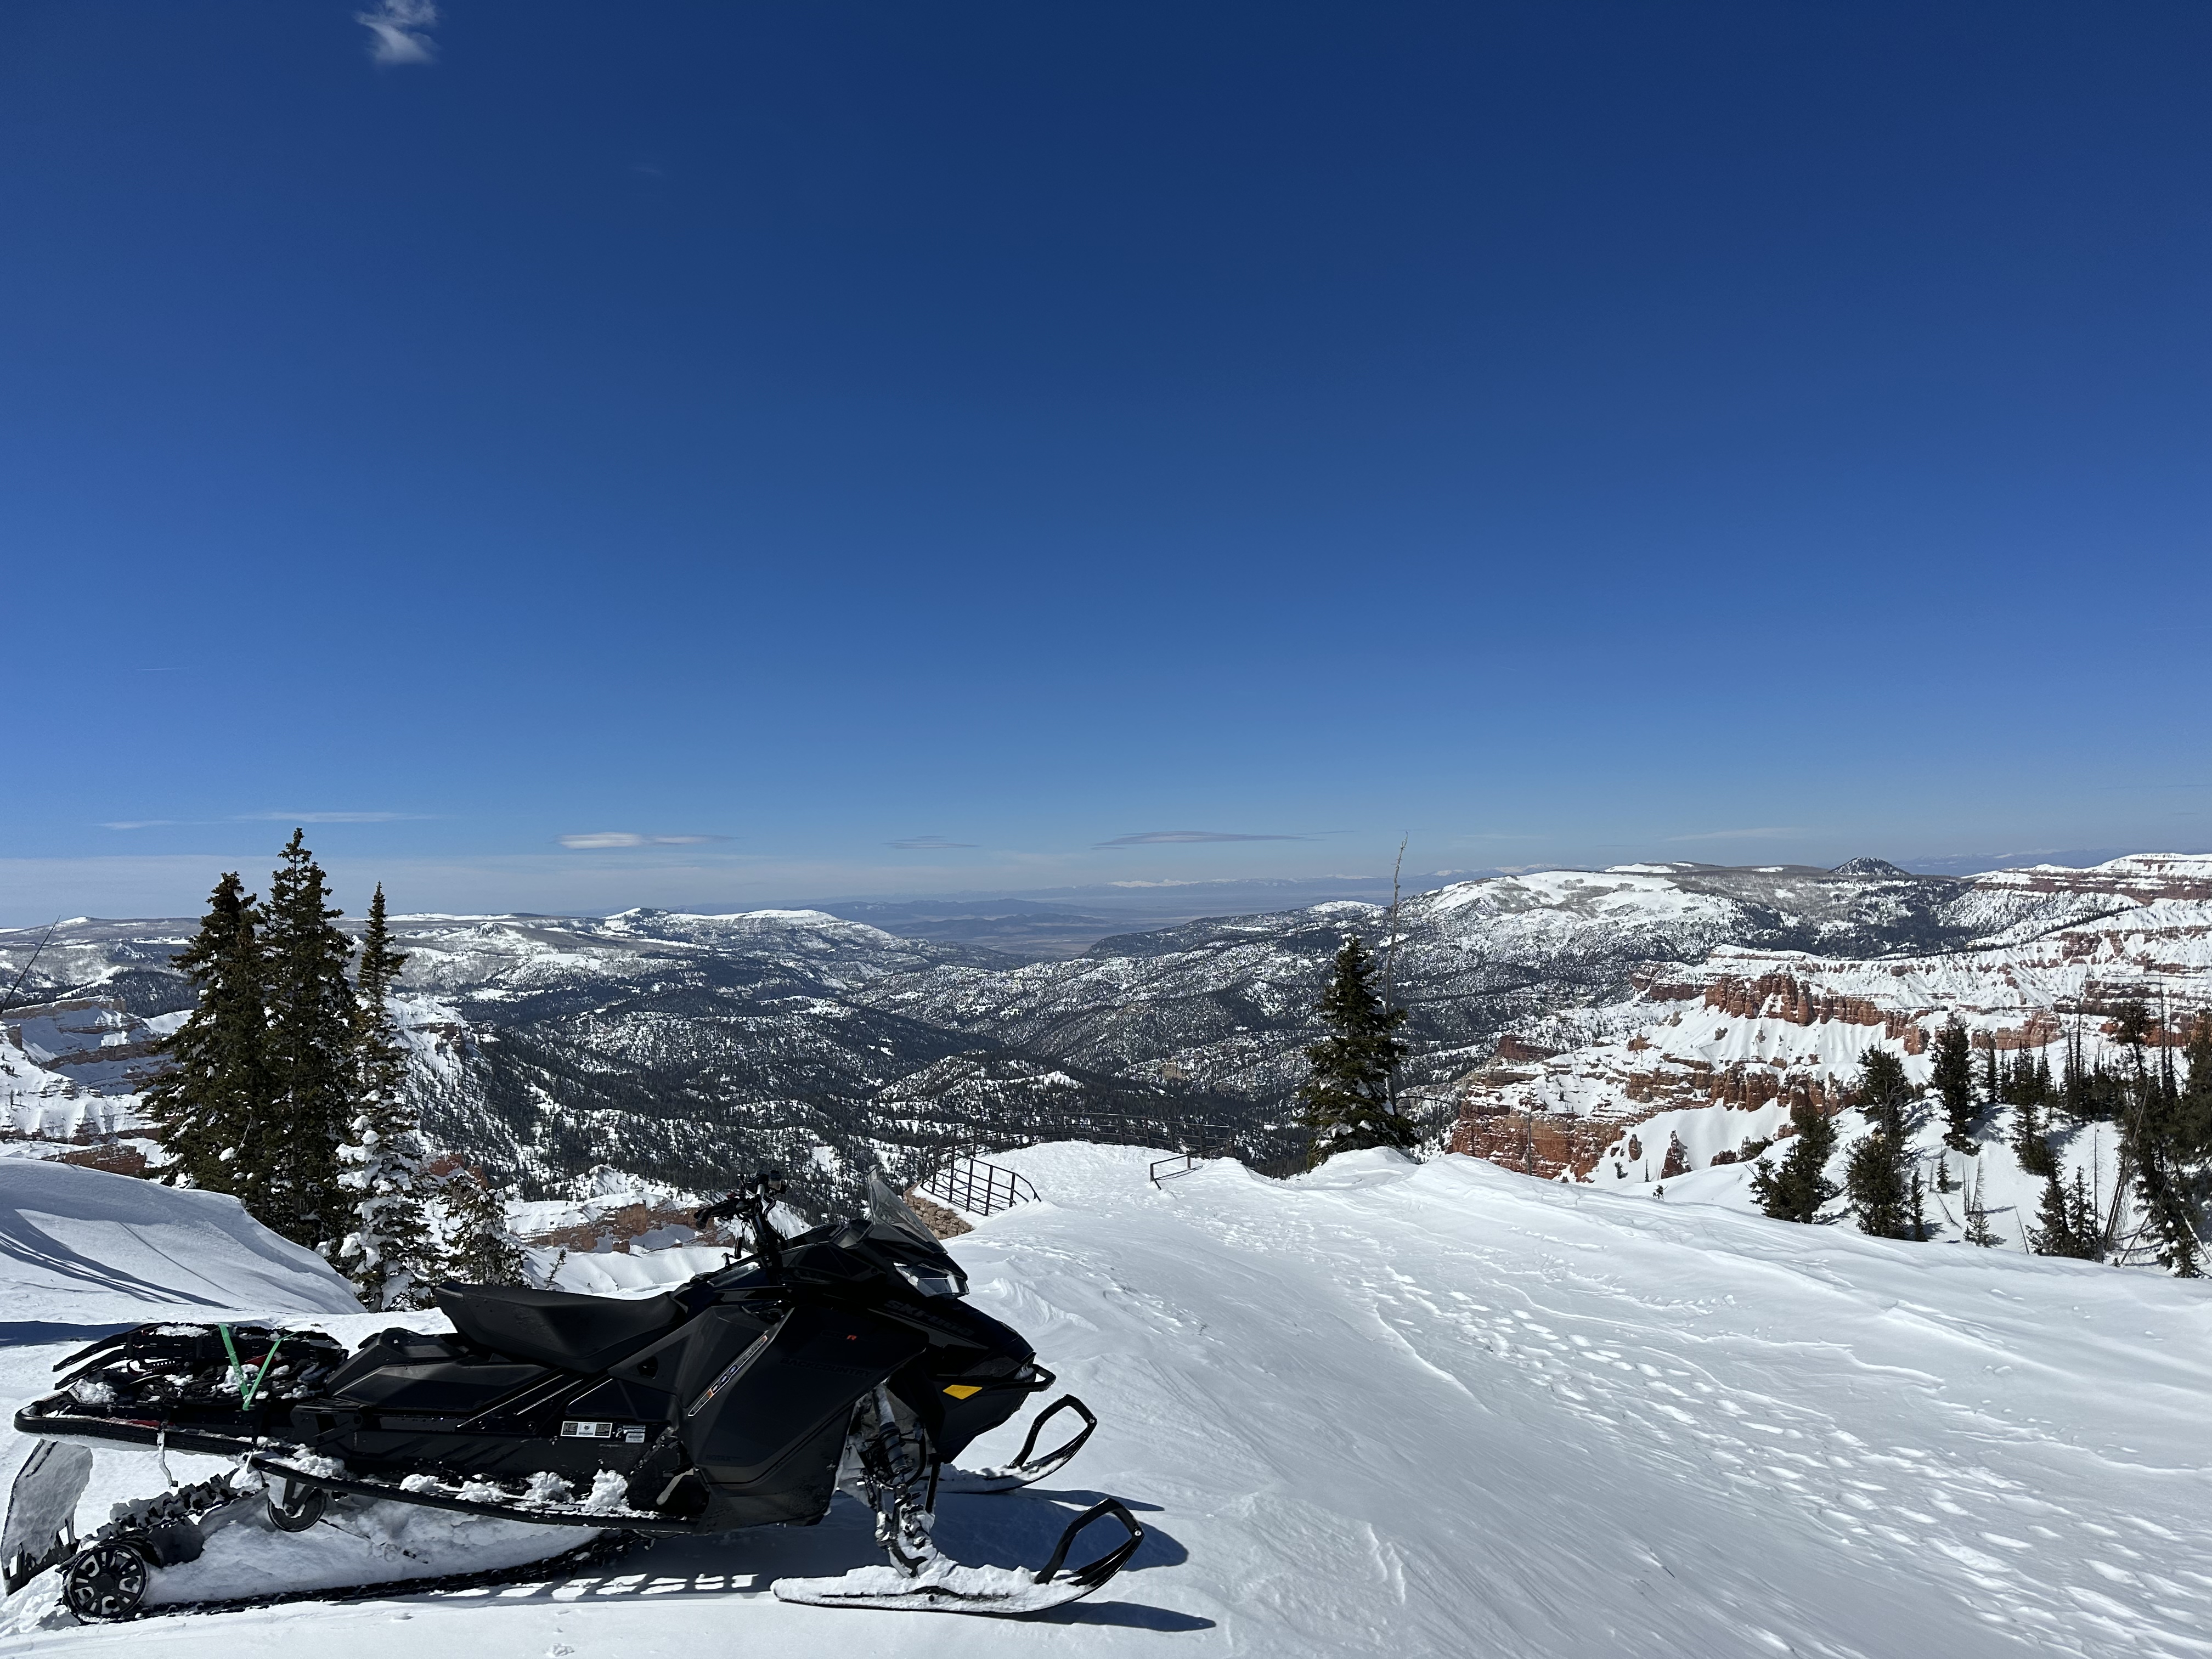 A Snowmobile is parked on the snow covered park road, near the Sunset View Overlook, looking west over a snowy landscape and cloudless sky.